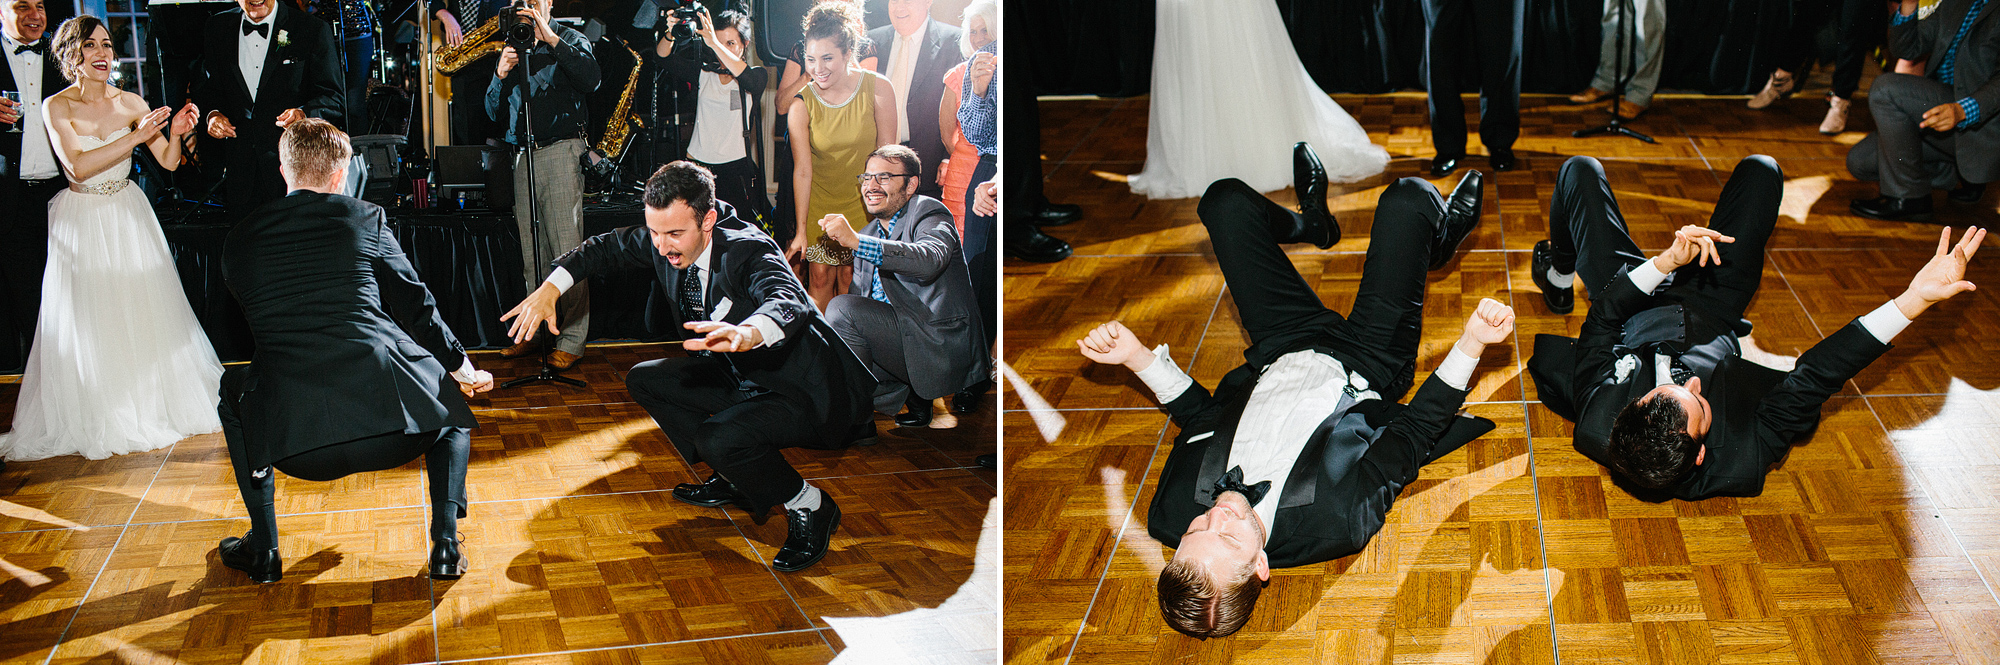 The groom and a friend dancing on the floor. 